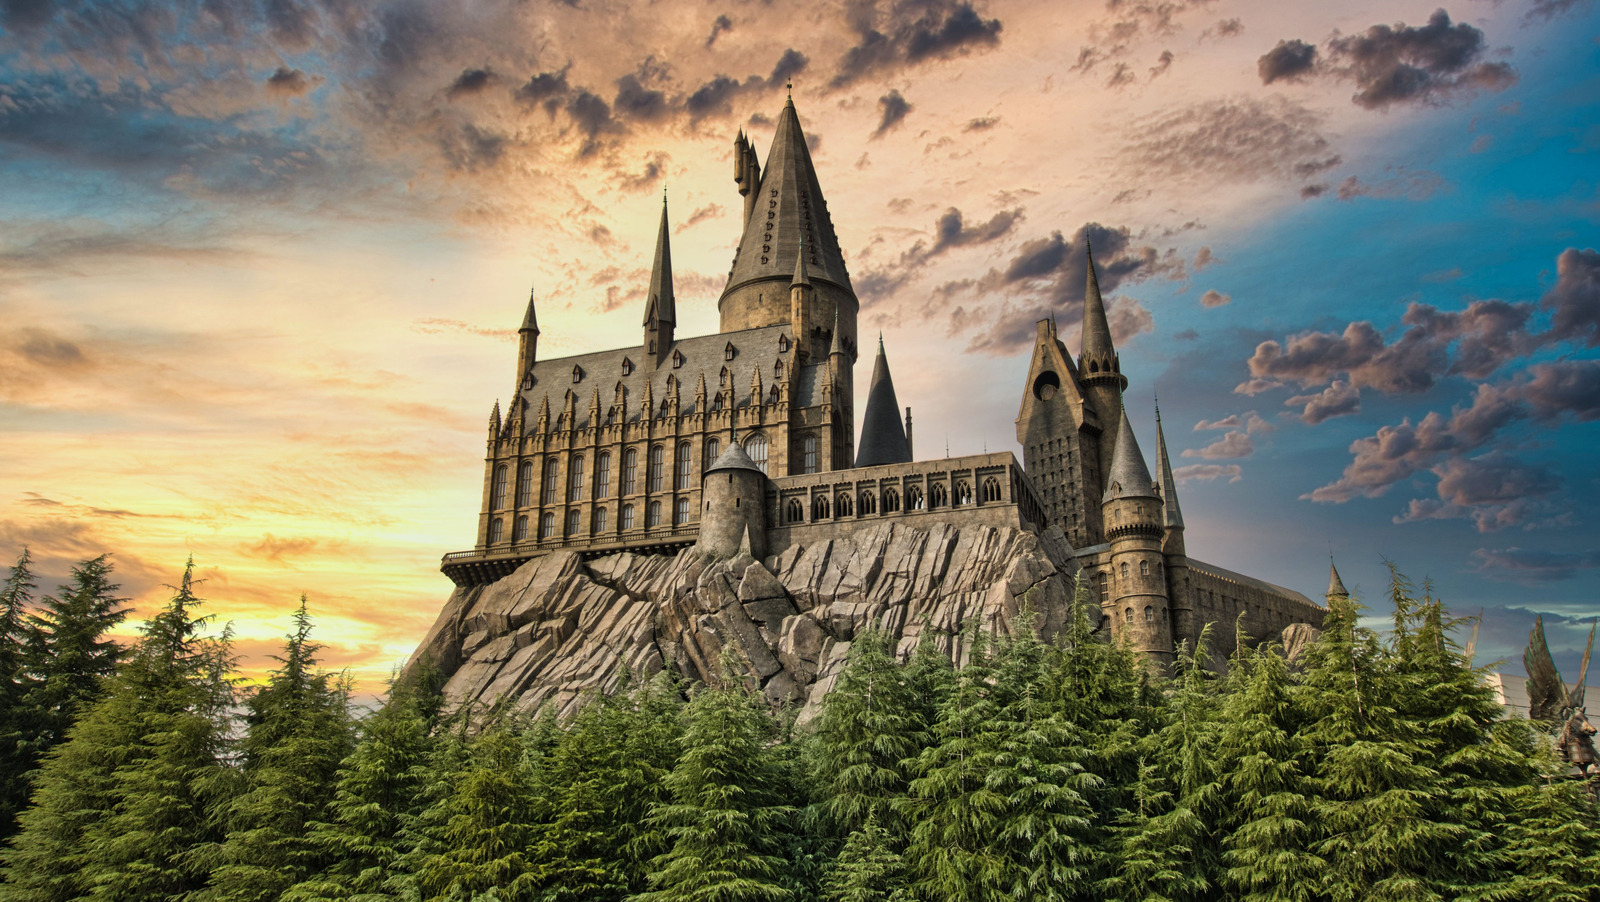 What Harry Potter House Am I?. Do you ever find yourself gazing